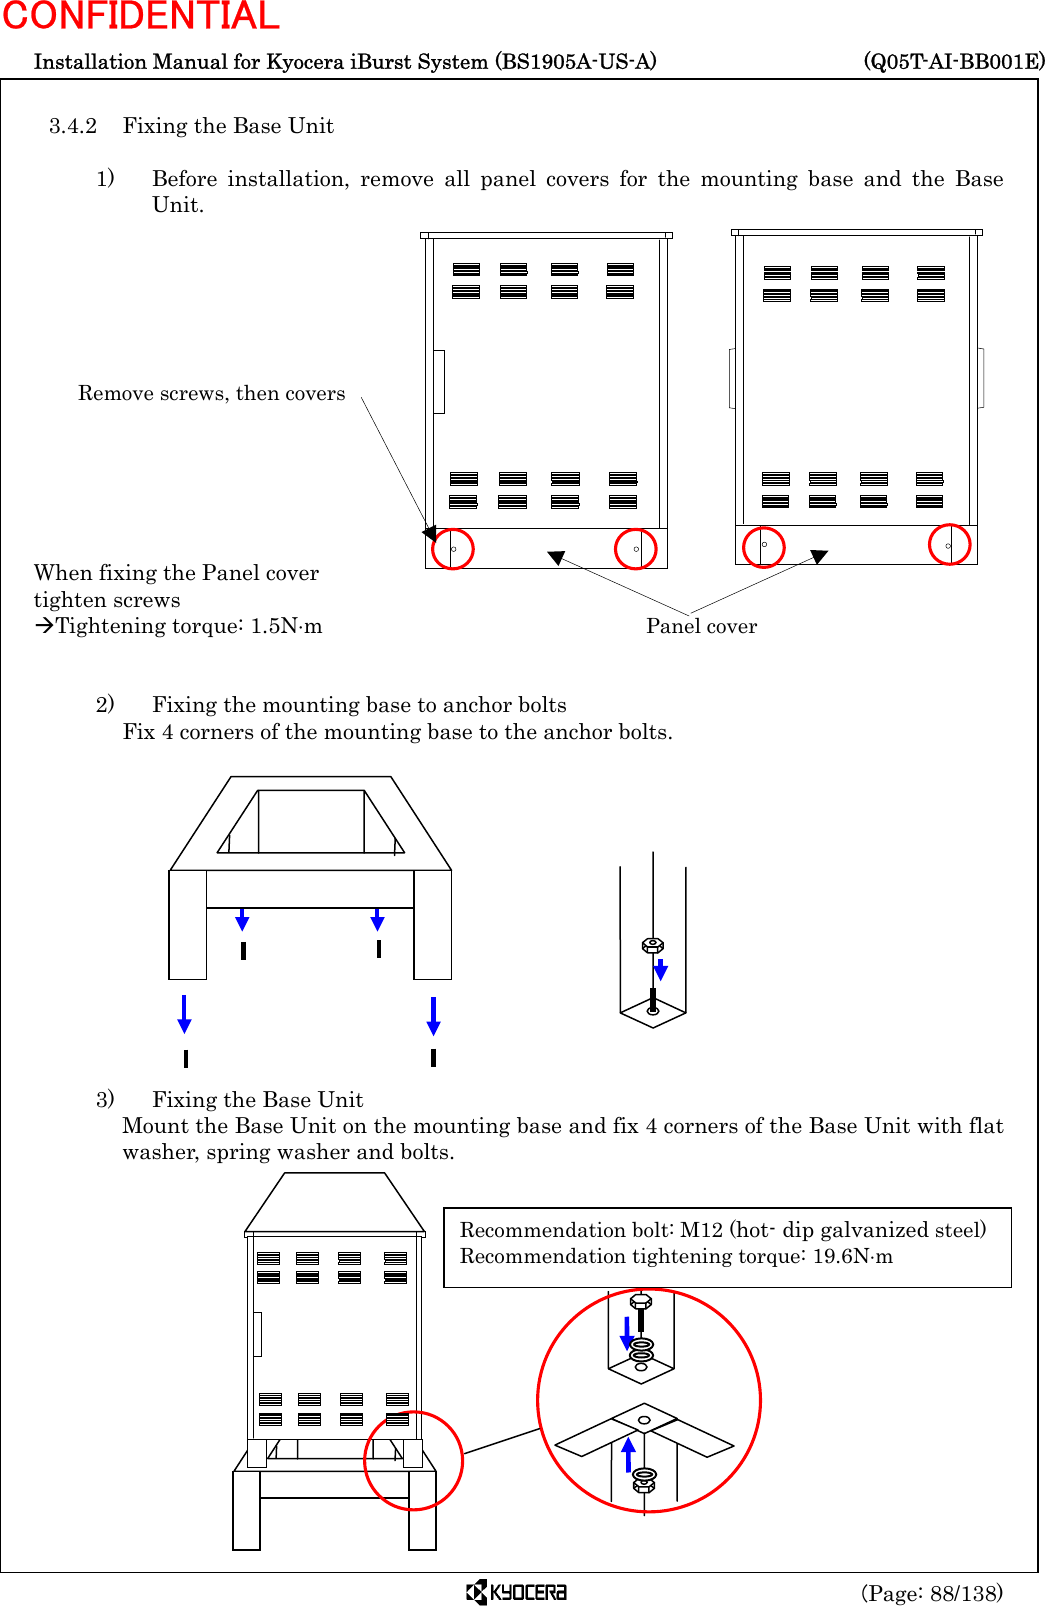  Installation Manual for Kyocera iBurst System (BS1905A-US-A)     (Q05T-AI-BB001E) (Page: 88/138) CONFIDENTIAL  3.4.2  Fixing the Base Unit  1)   Before installation, remove all panel covers for the mounting base and the Base Unit.              When fixing the Panel cover tighten screws ÆTightening torque: 1.5N⋅m   2)    Fixing the mounting base to anchor bolts  Fix 4 corners of the mounting base to the anchor bolts.              3)    Fixing the Base Unit Mount the Base Unit on the mounting base and fix 4 corners of the Base Unit with flat washer, spring washer and bolts.               Remove screws, then covers Panel cover Recommendation bolt: M12 (hot- dip galvanized steel) Recommendation tightening torque: 19.6N⋅m 